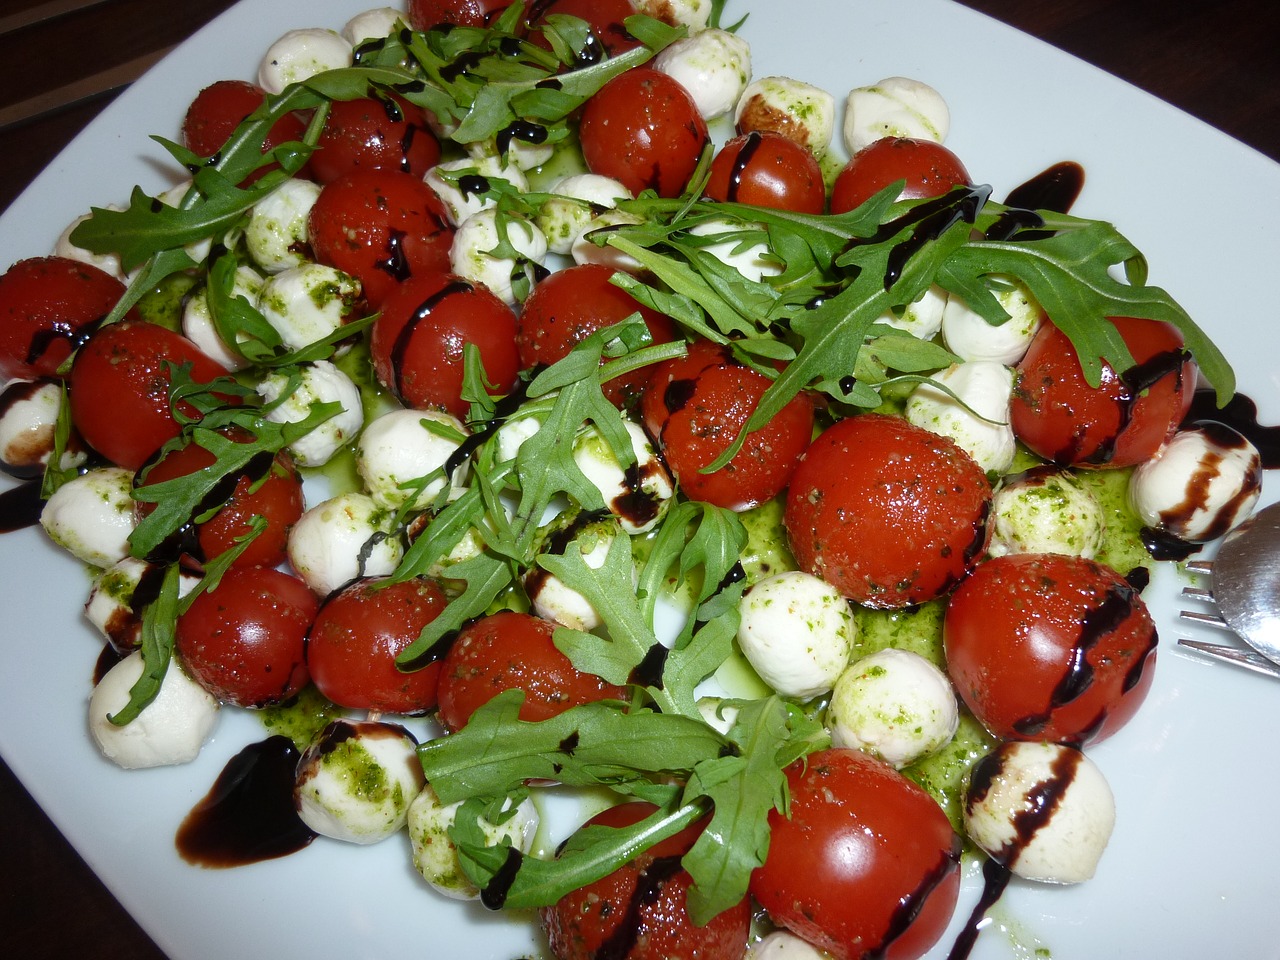 Marinated Tomatoes With Basil and Balsamic Vinegar